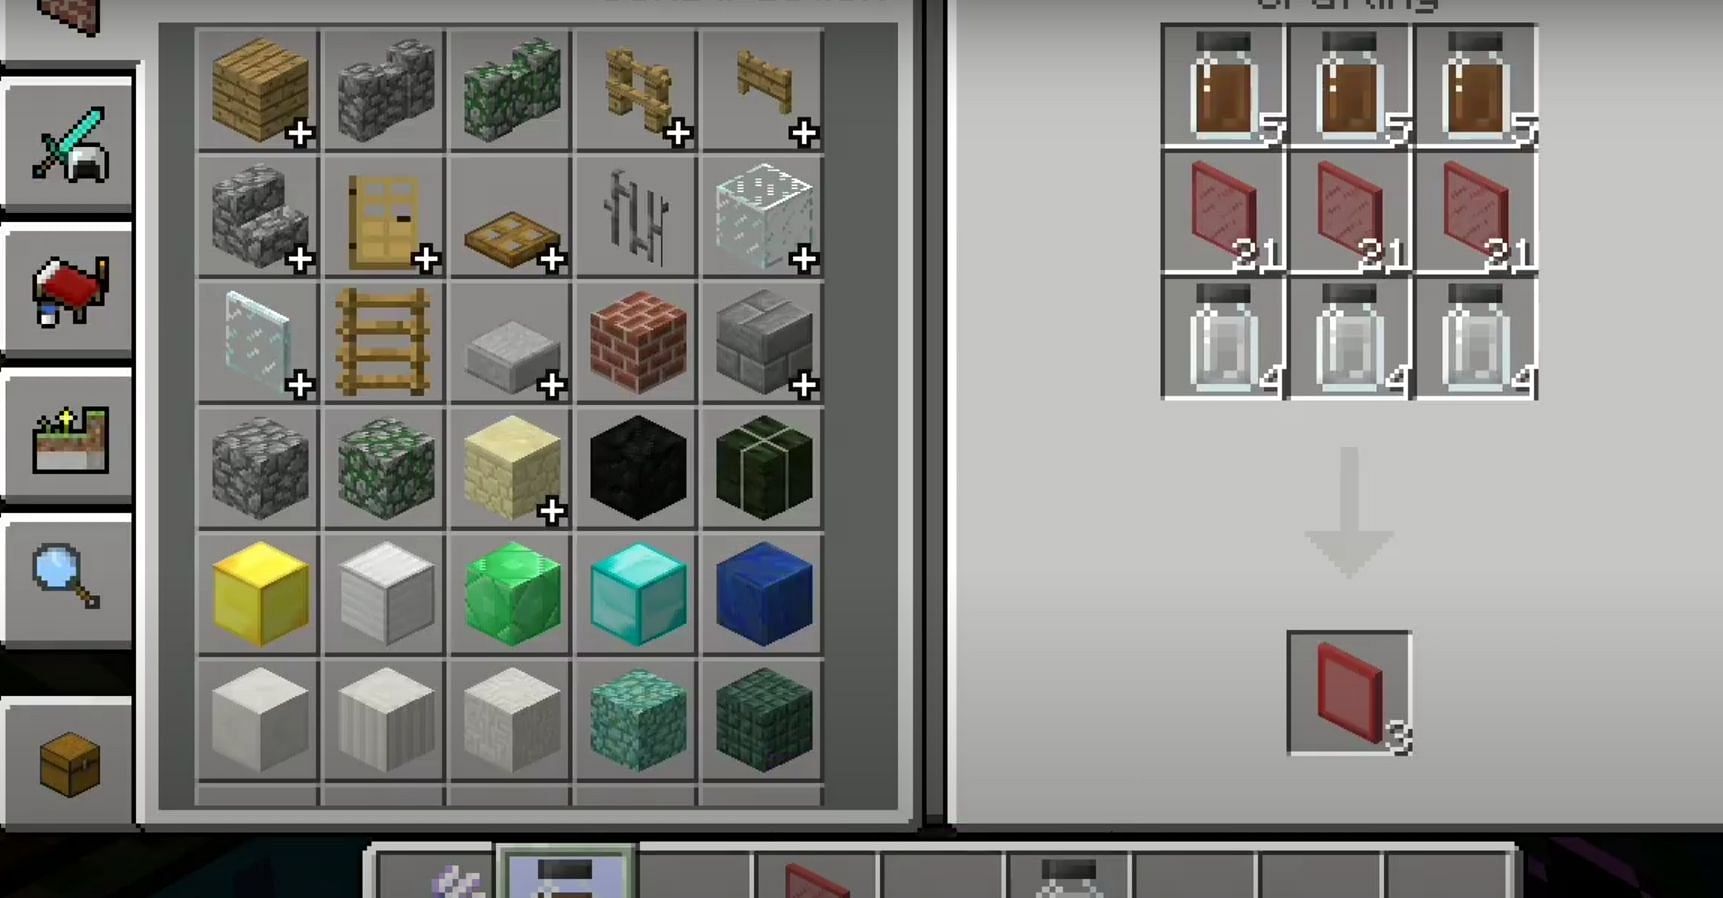 Hardened glass panes being created via crafting in Minecraft: Pocket Edition with Education Edition features enabled (Image via Mojang)